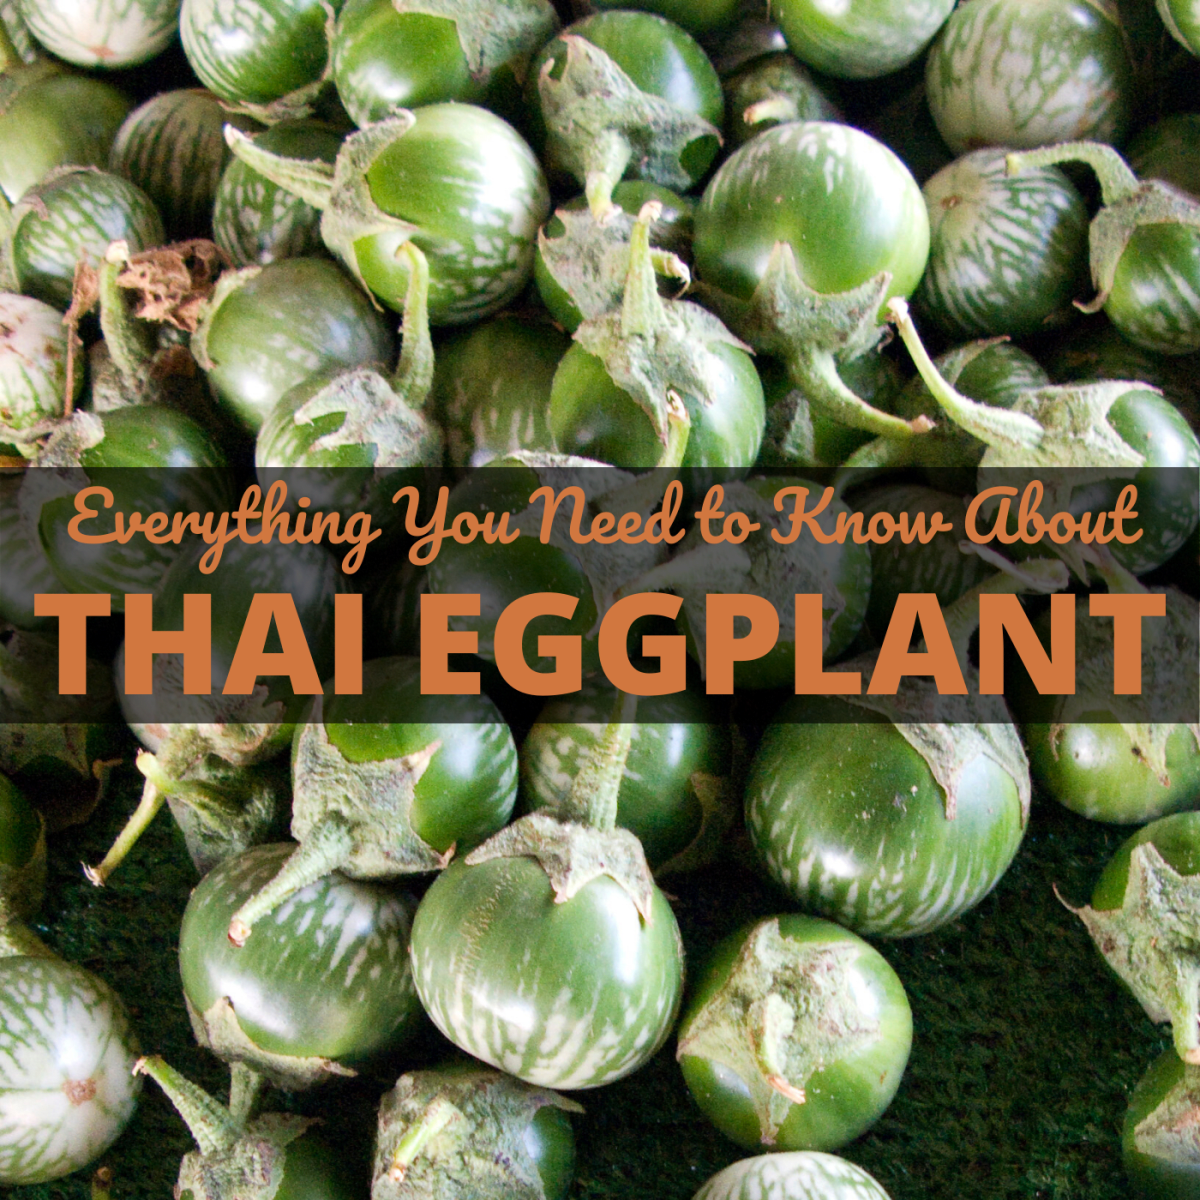 Indian Baby Eggplant Also Know As  Thai Baby Eggplant Eggplant Seeds Round Purple Thai Purple Eggplant Organic !